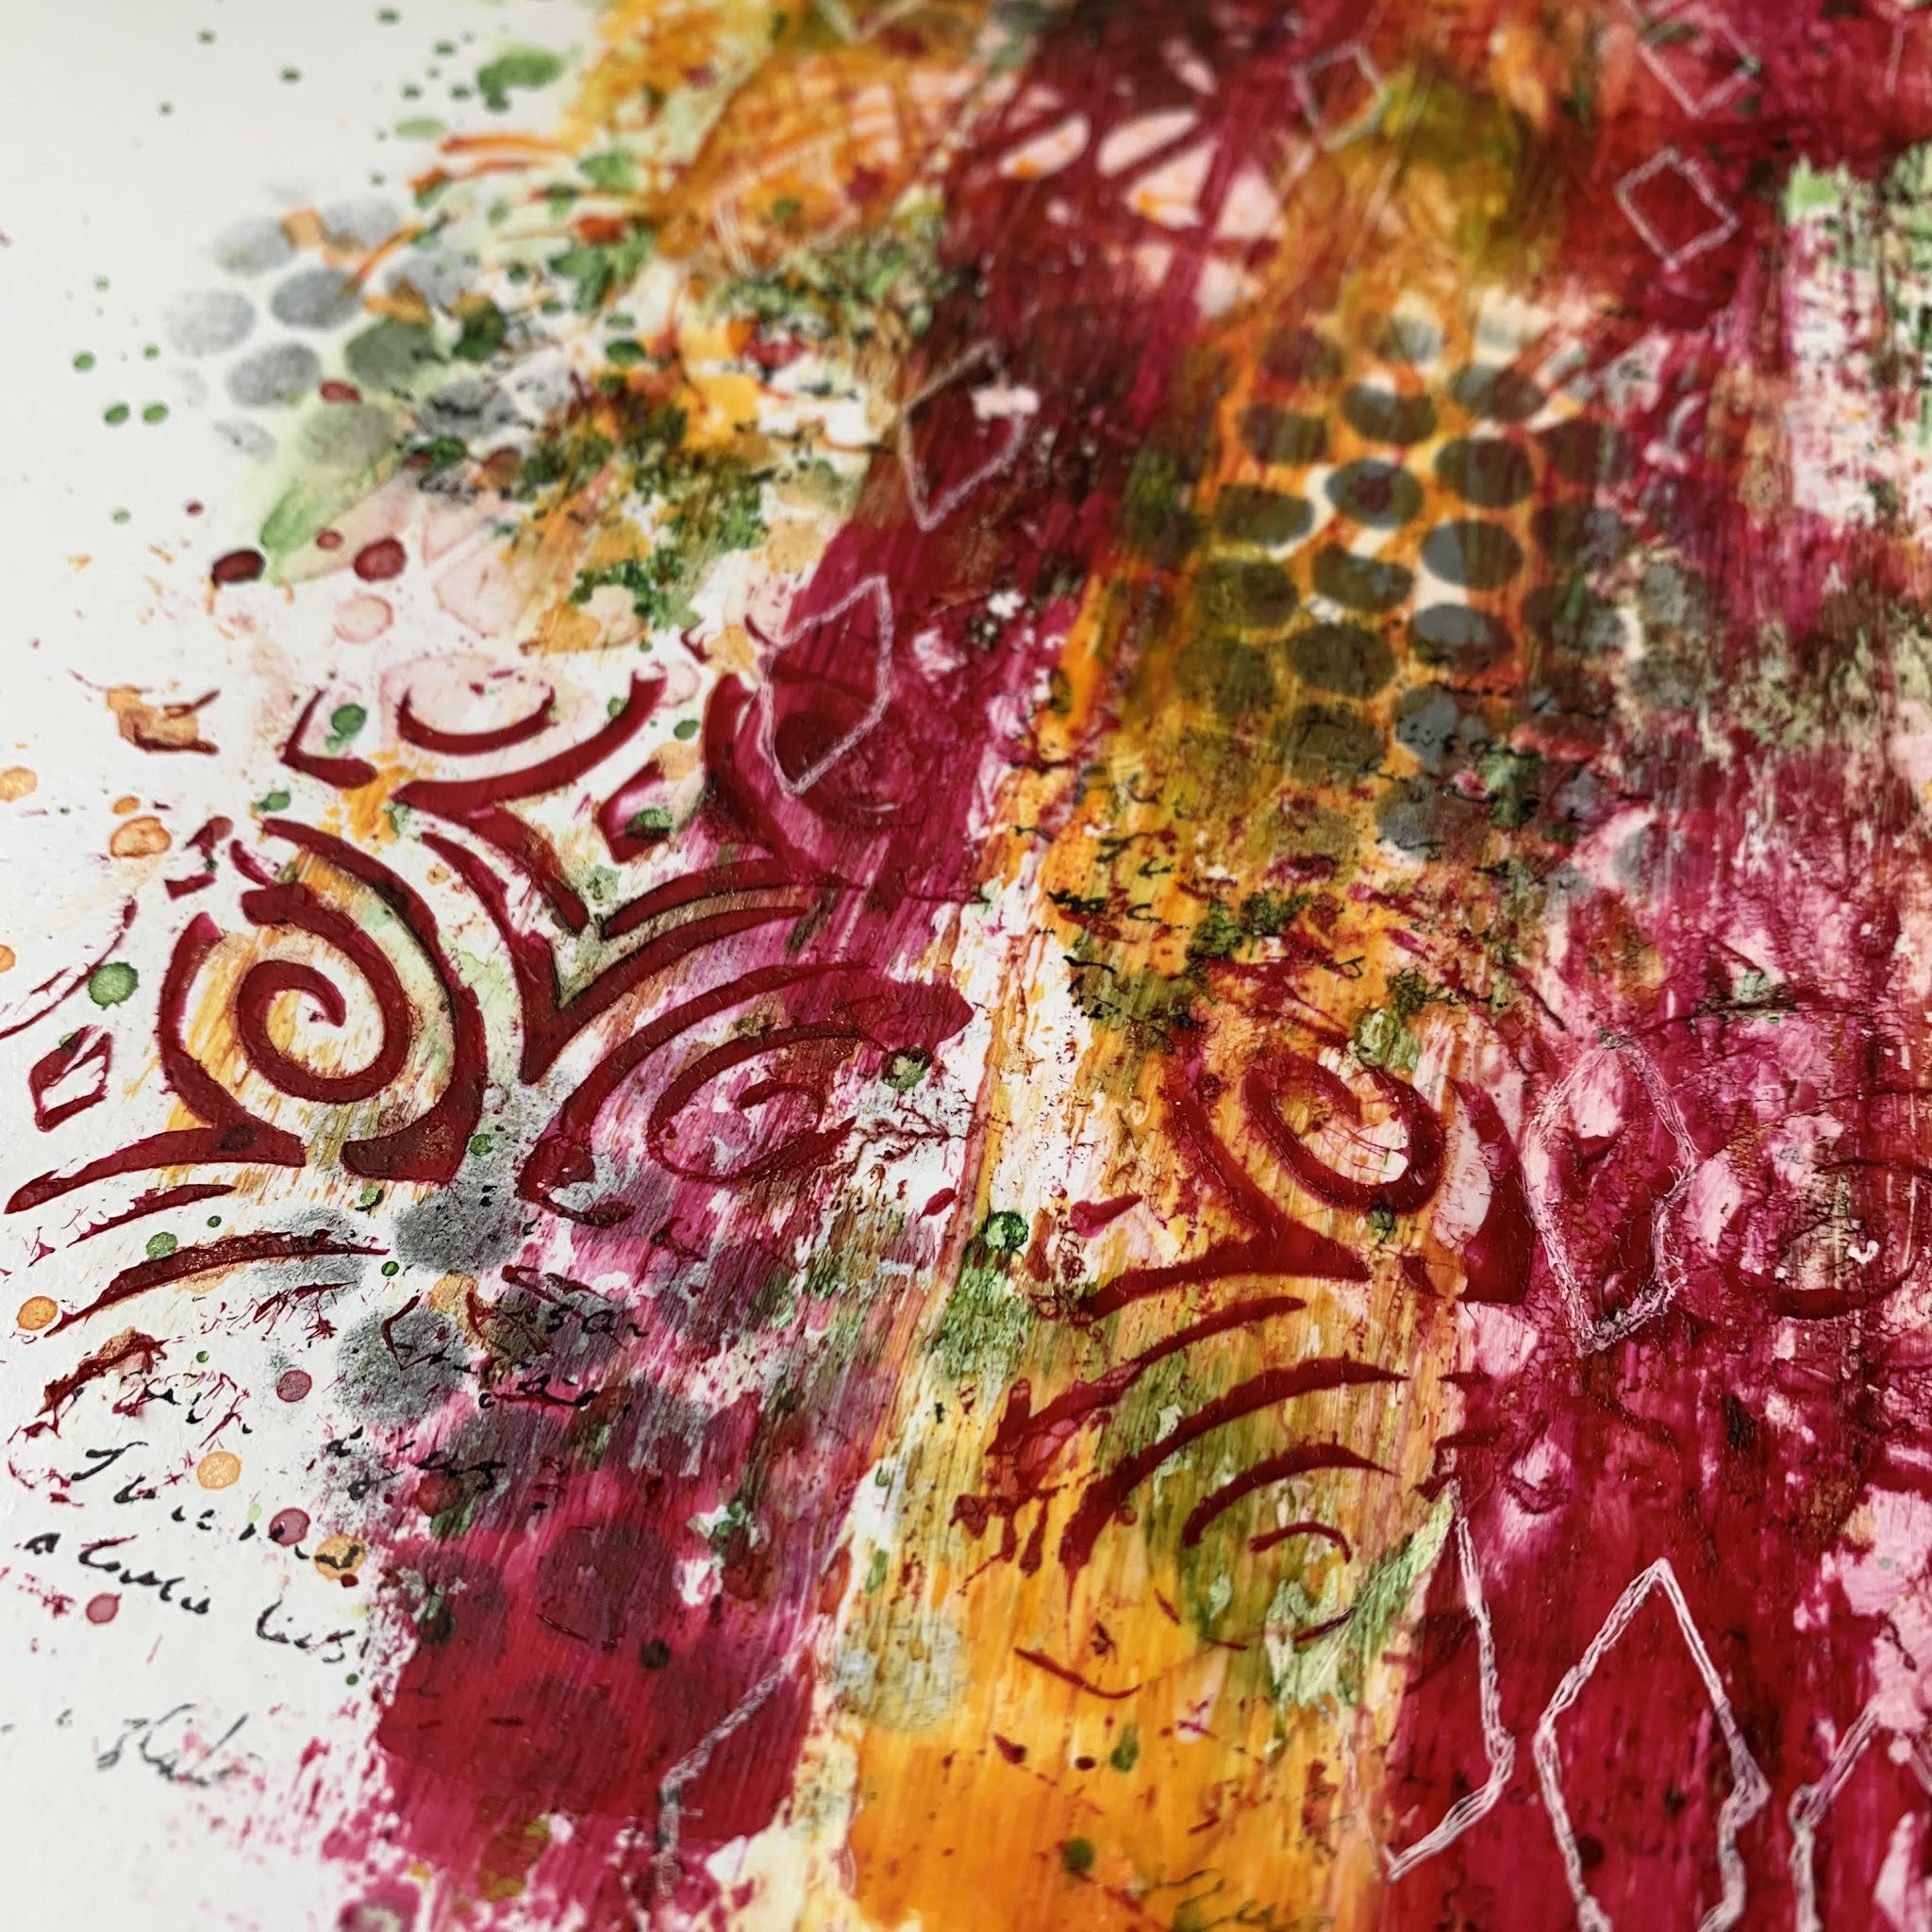 StencilGirl® Talk: From Diary to Art Journal: Creating Veils of Memory with  Gel Resist on Rice Paper